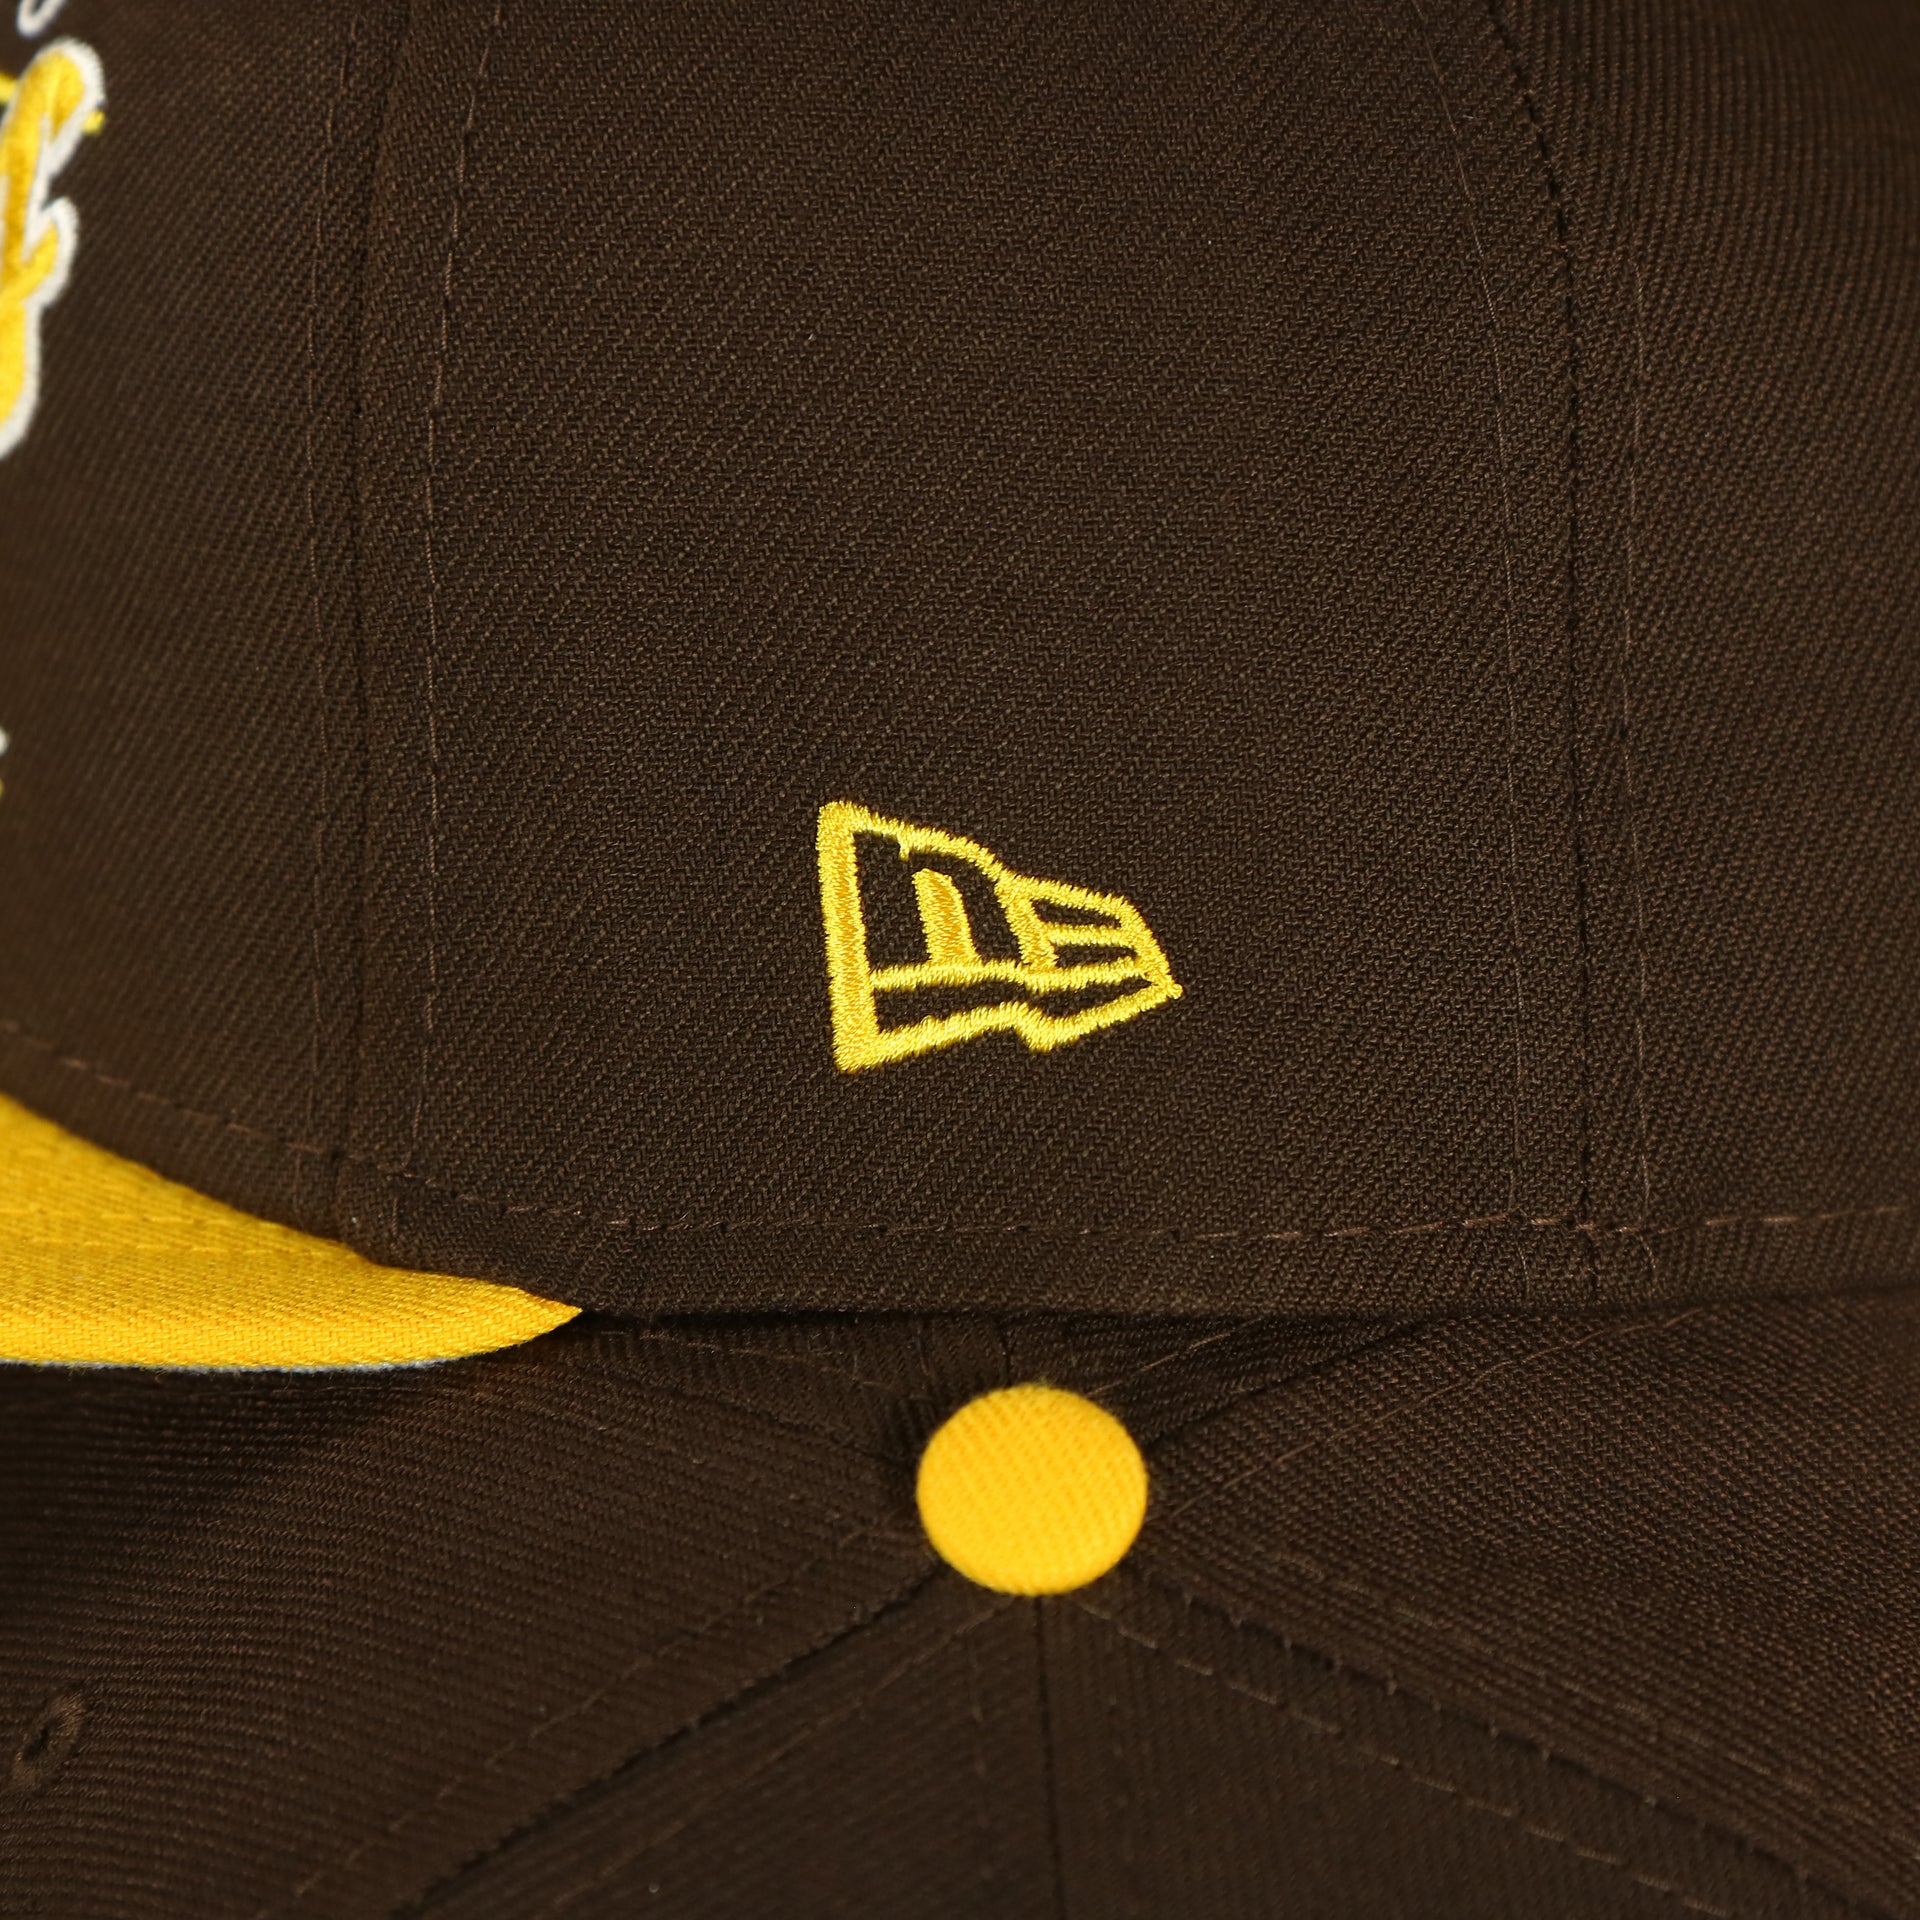 new era logo on the San Diego Padres "Team Script" College Bar 9Fifty Snapback Hat | Brown/Yellow Steelers 950 Snap Cap